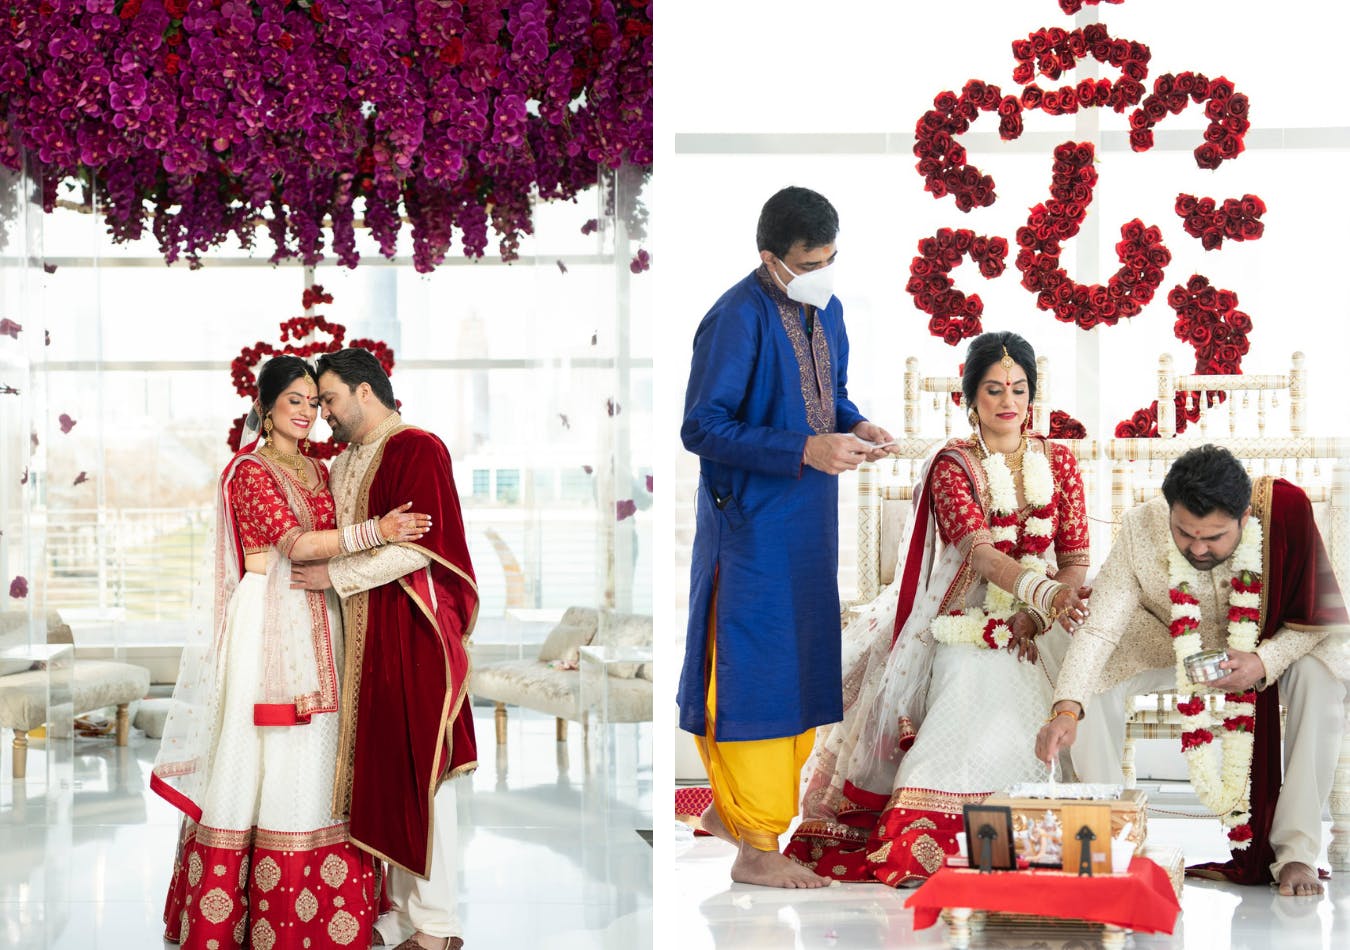 Intimate South Asian wedding at Adler Planetarium with deep purple and red floral décor | PartySlate